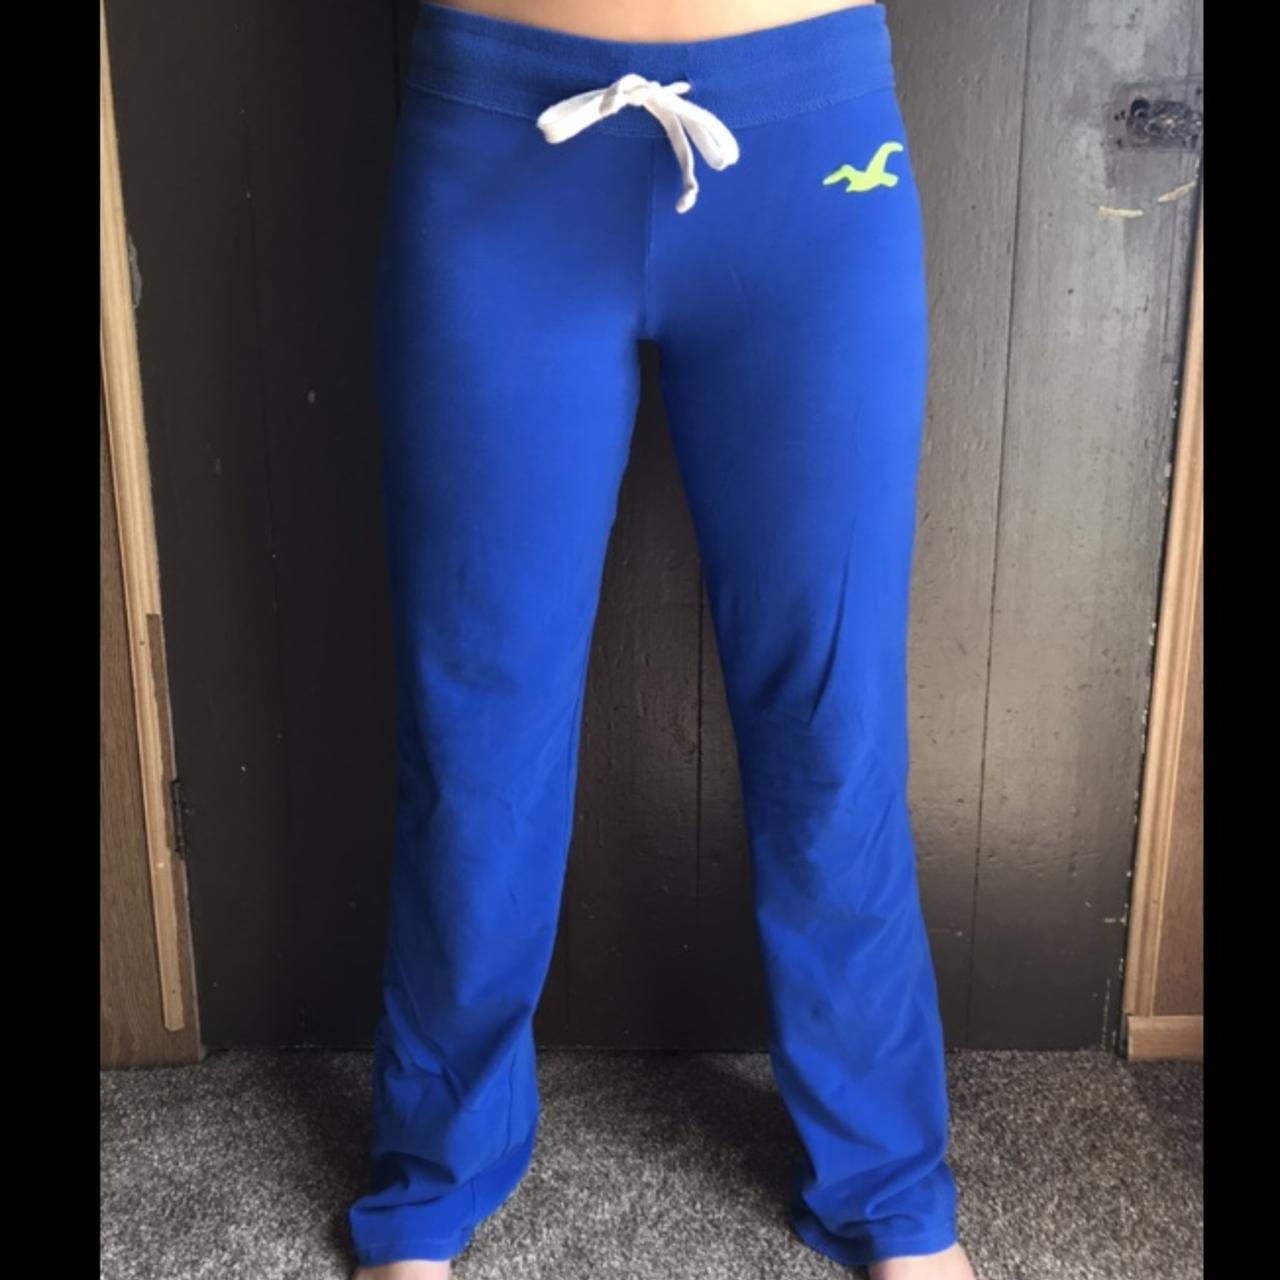 blue Hollister sweatpants! 💙 in very good condition - Depop